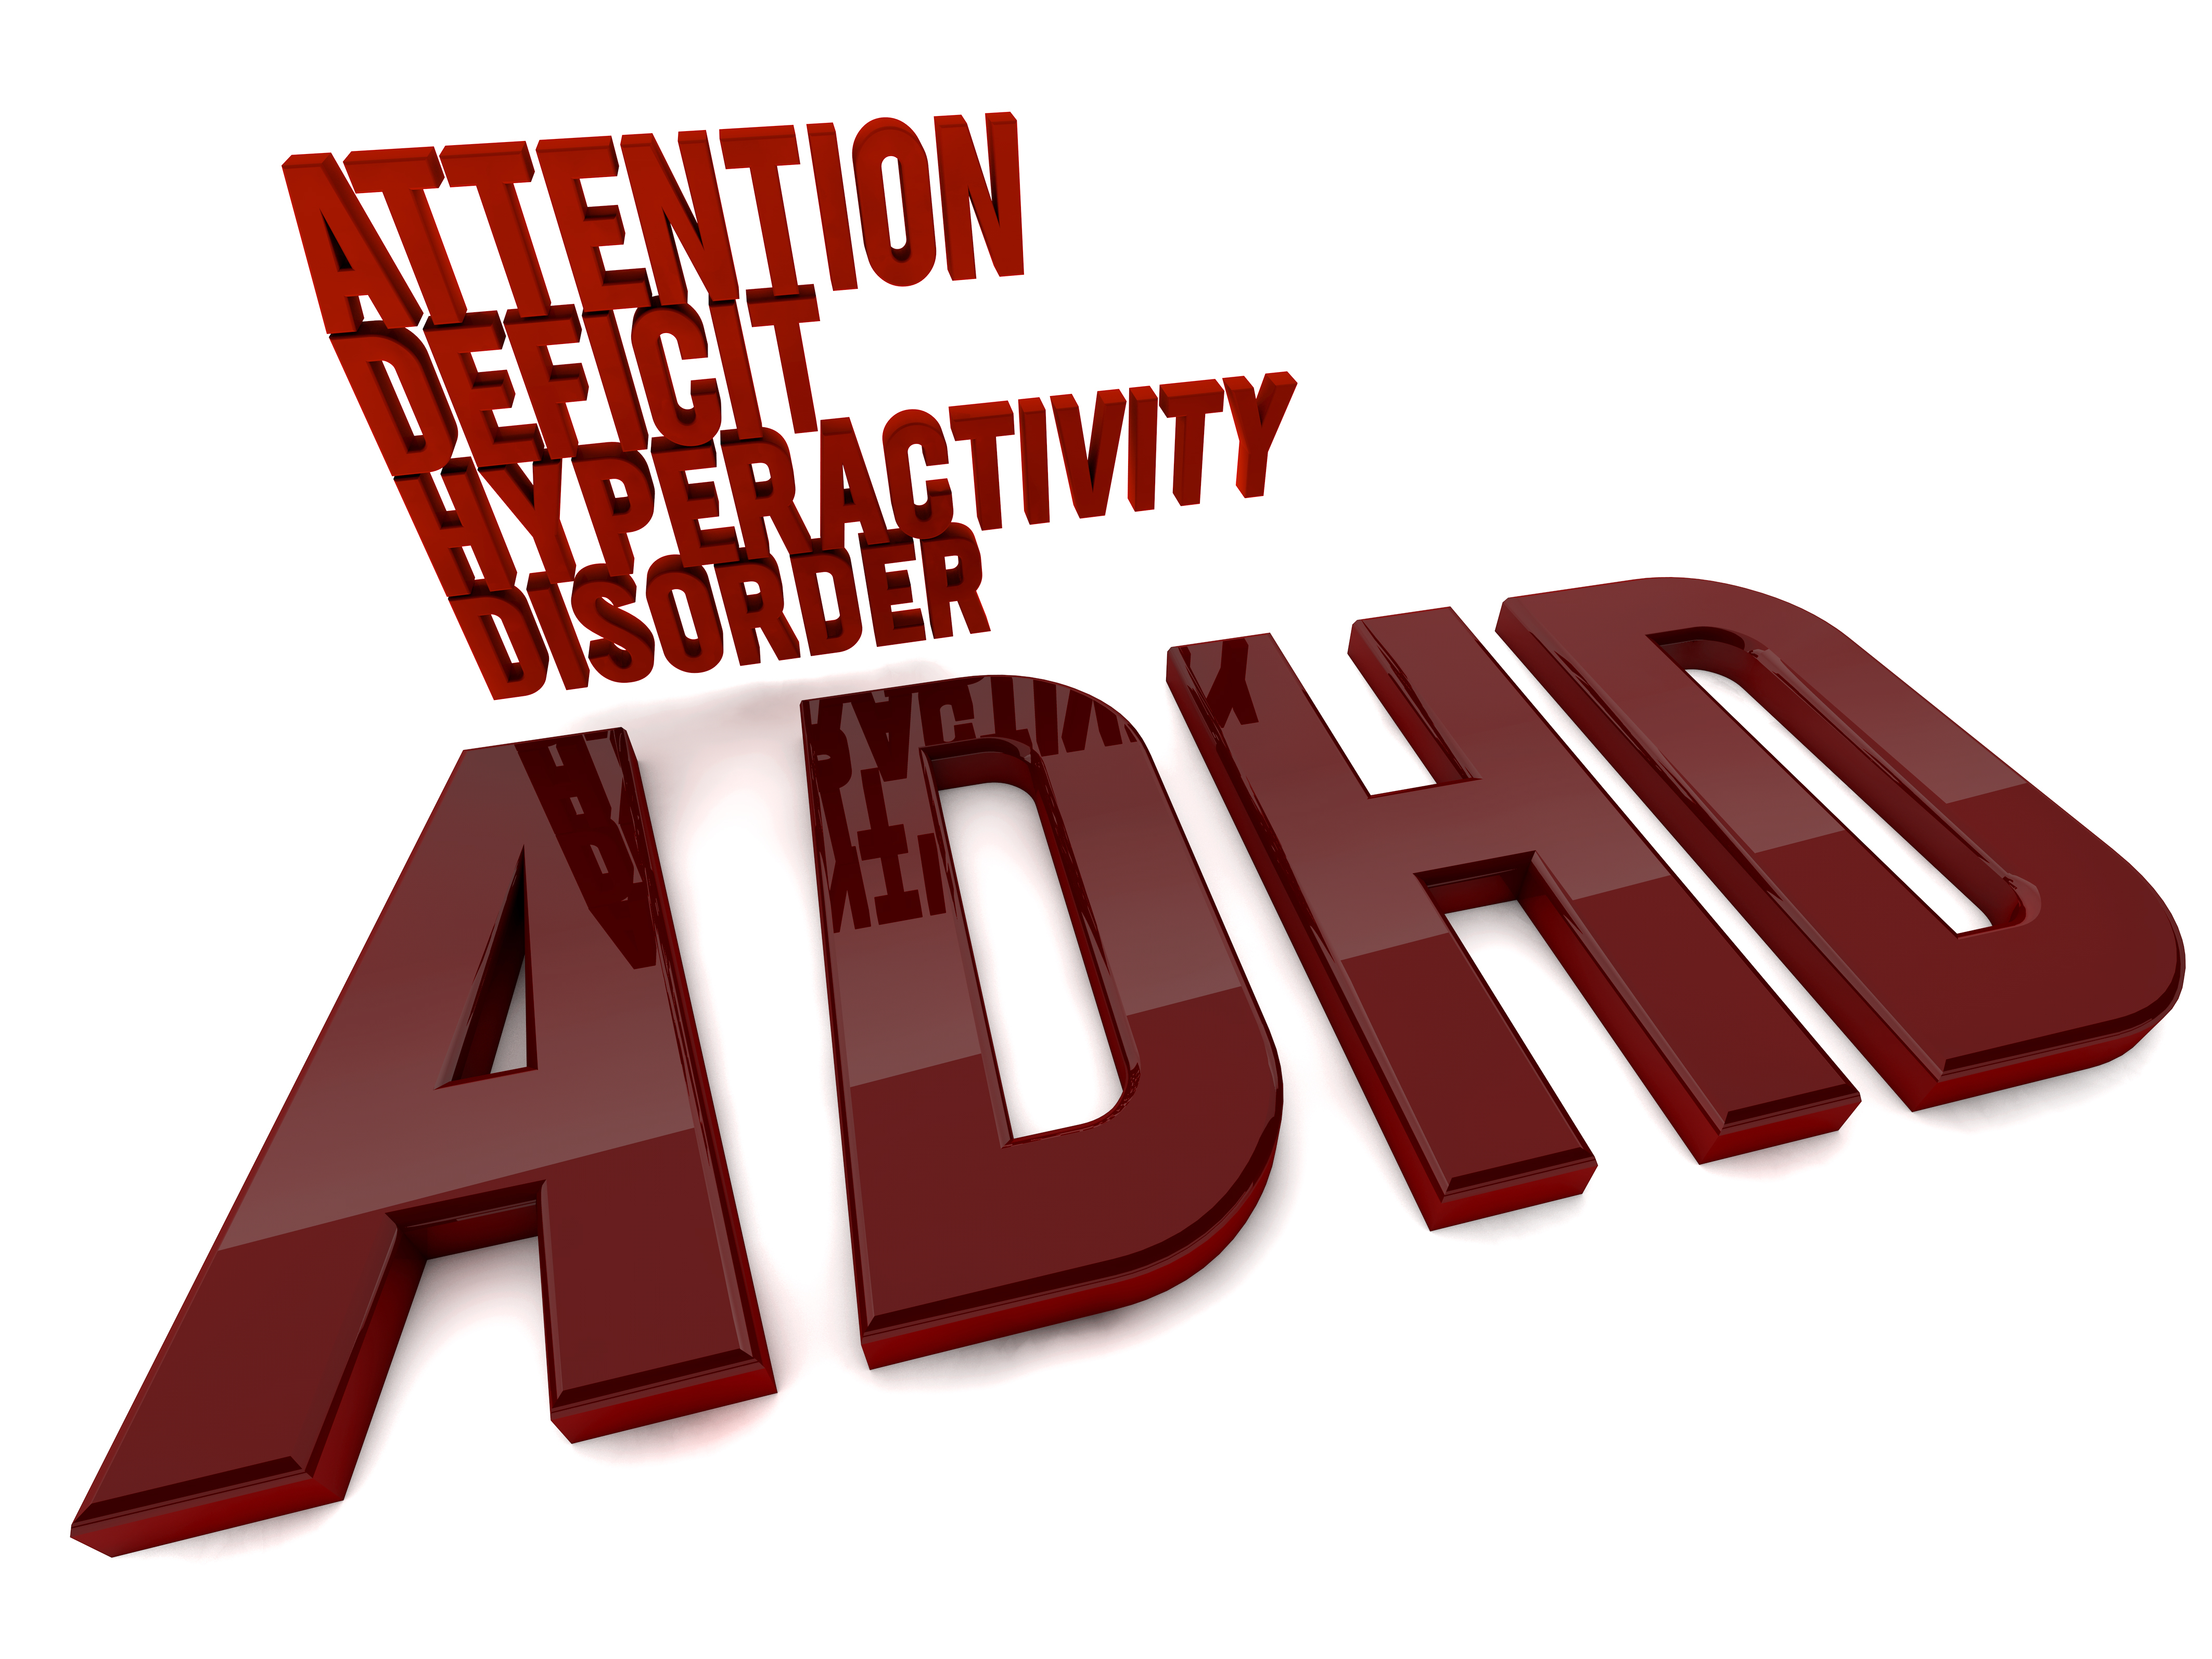 Is He Just Being a Boy, or Does He Have ADHD? Dr. David
Palmiter\u002639;s Blog for Hectic Parents